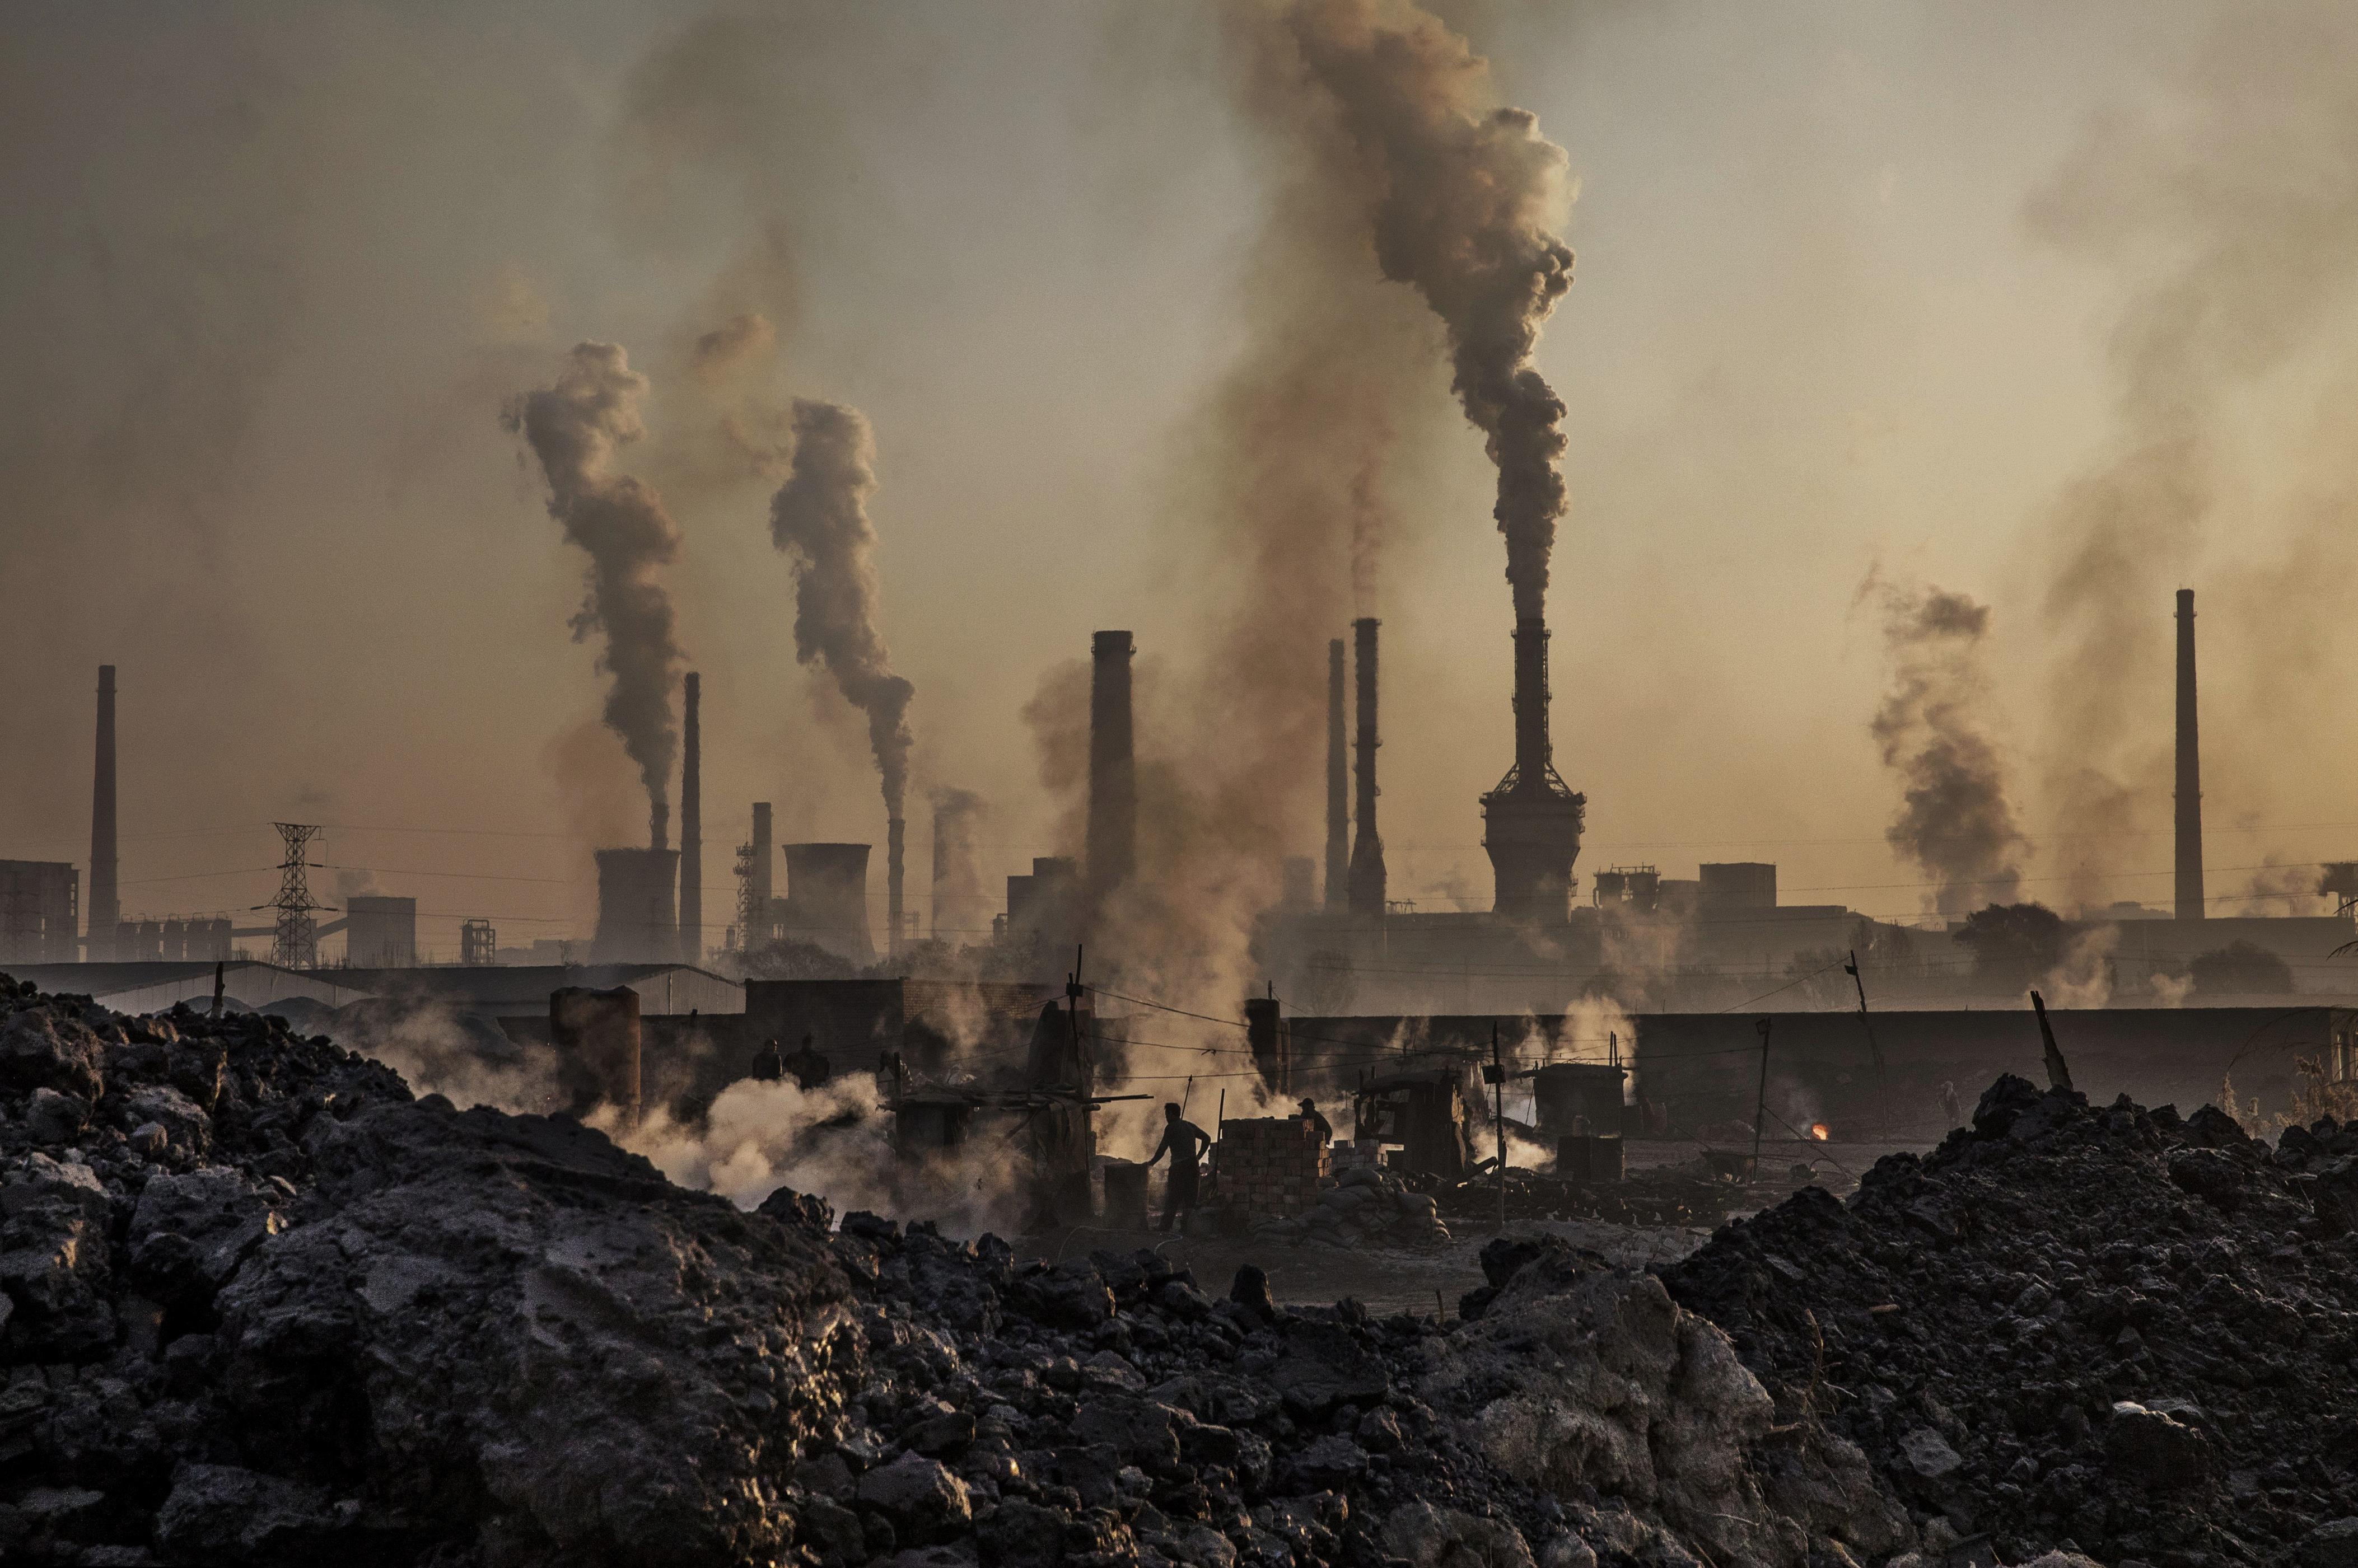 greenhouse gases are rocketing to record levels – highest in at least 800,000 years